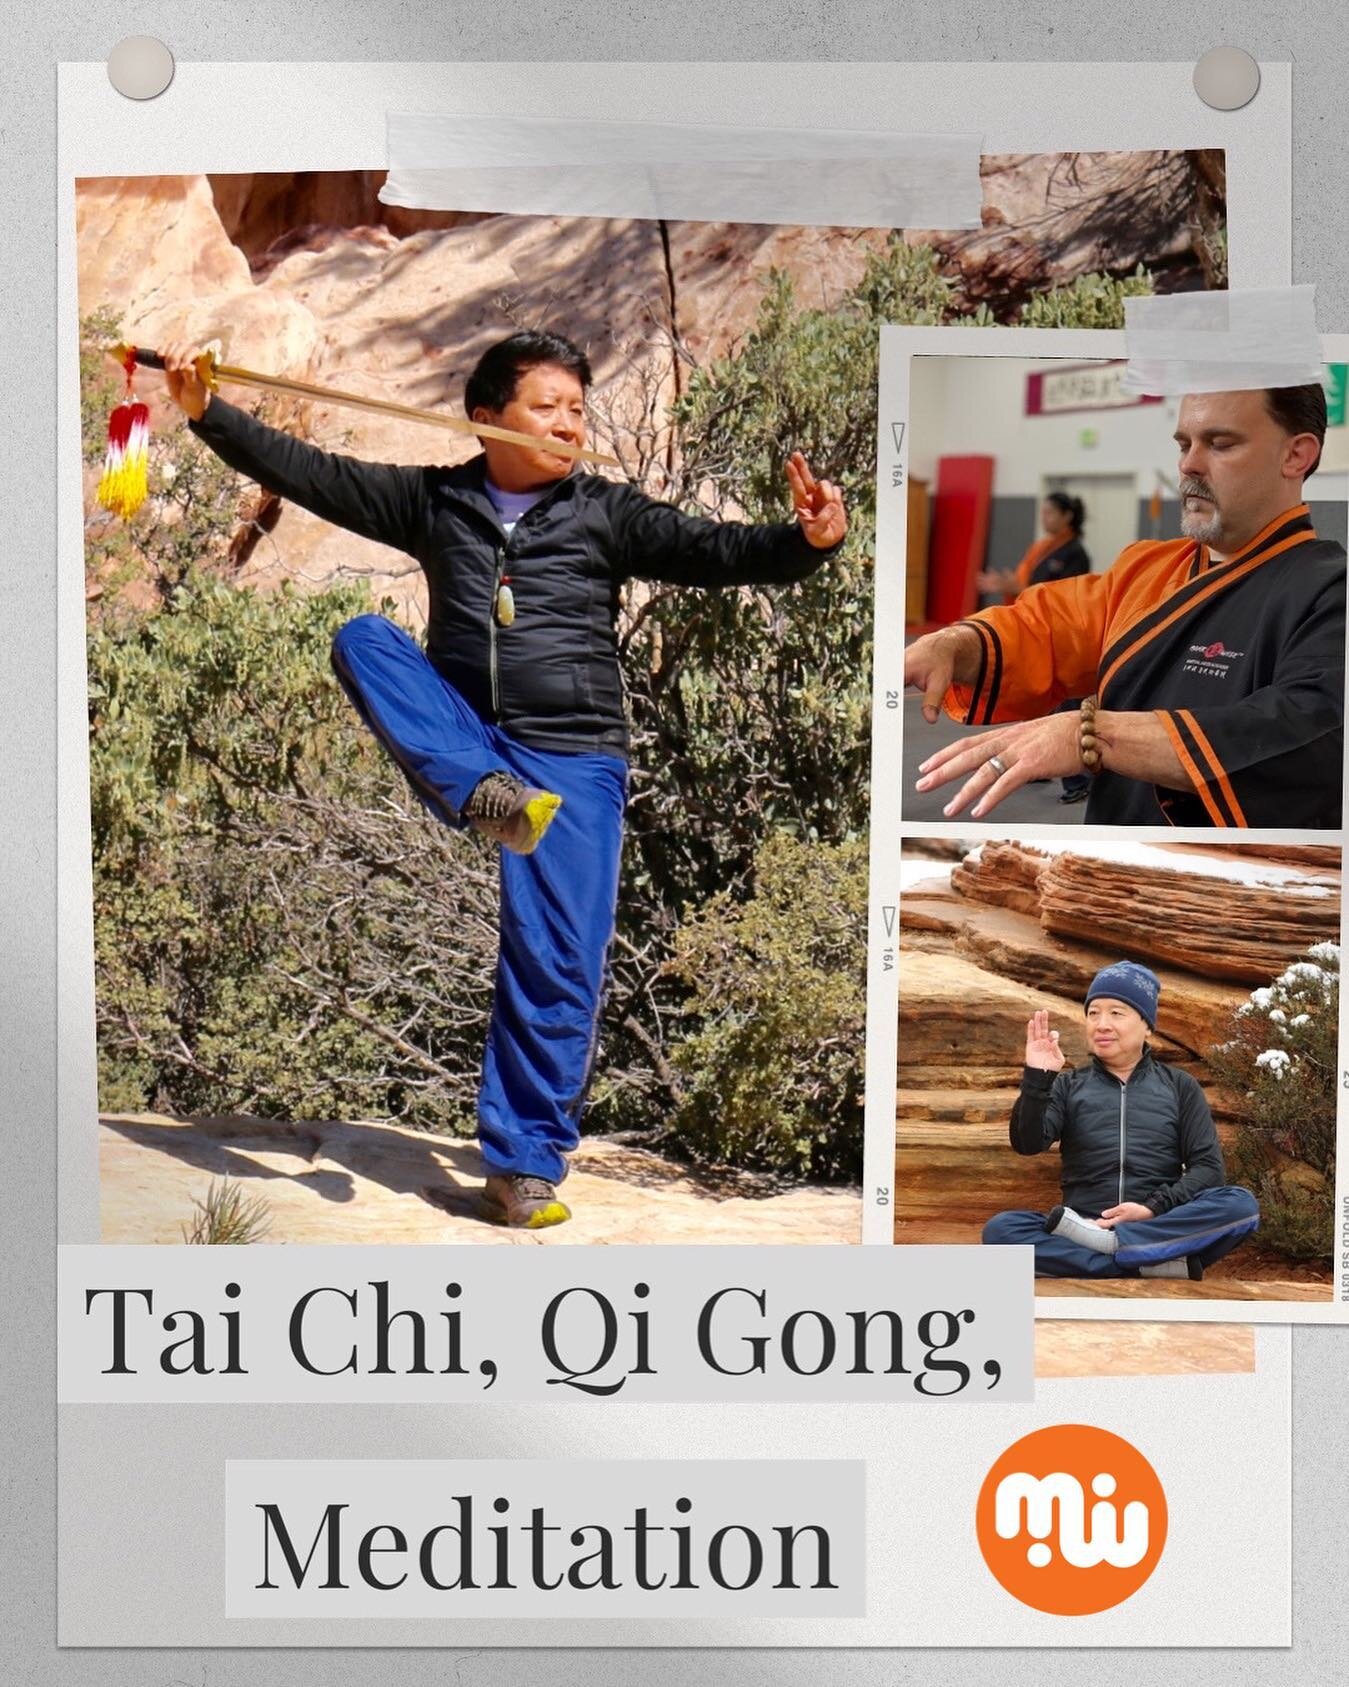 Tai Chi, Qi Gong, and Meditation. #monkwiseacademy #taichi #meditaion #qigong #bewise #utah #saltlakecity #healthylifestyle #now #lifestyle